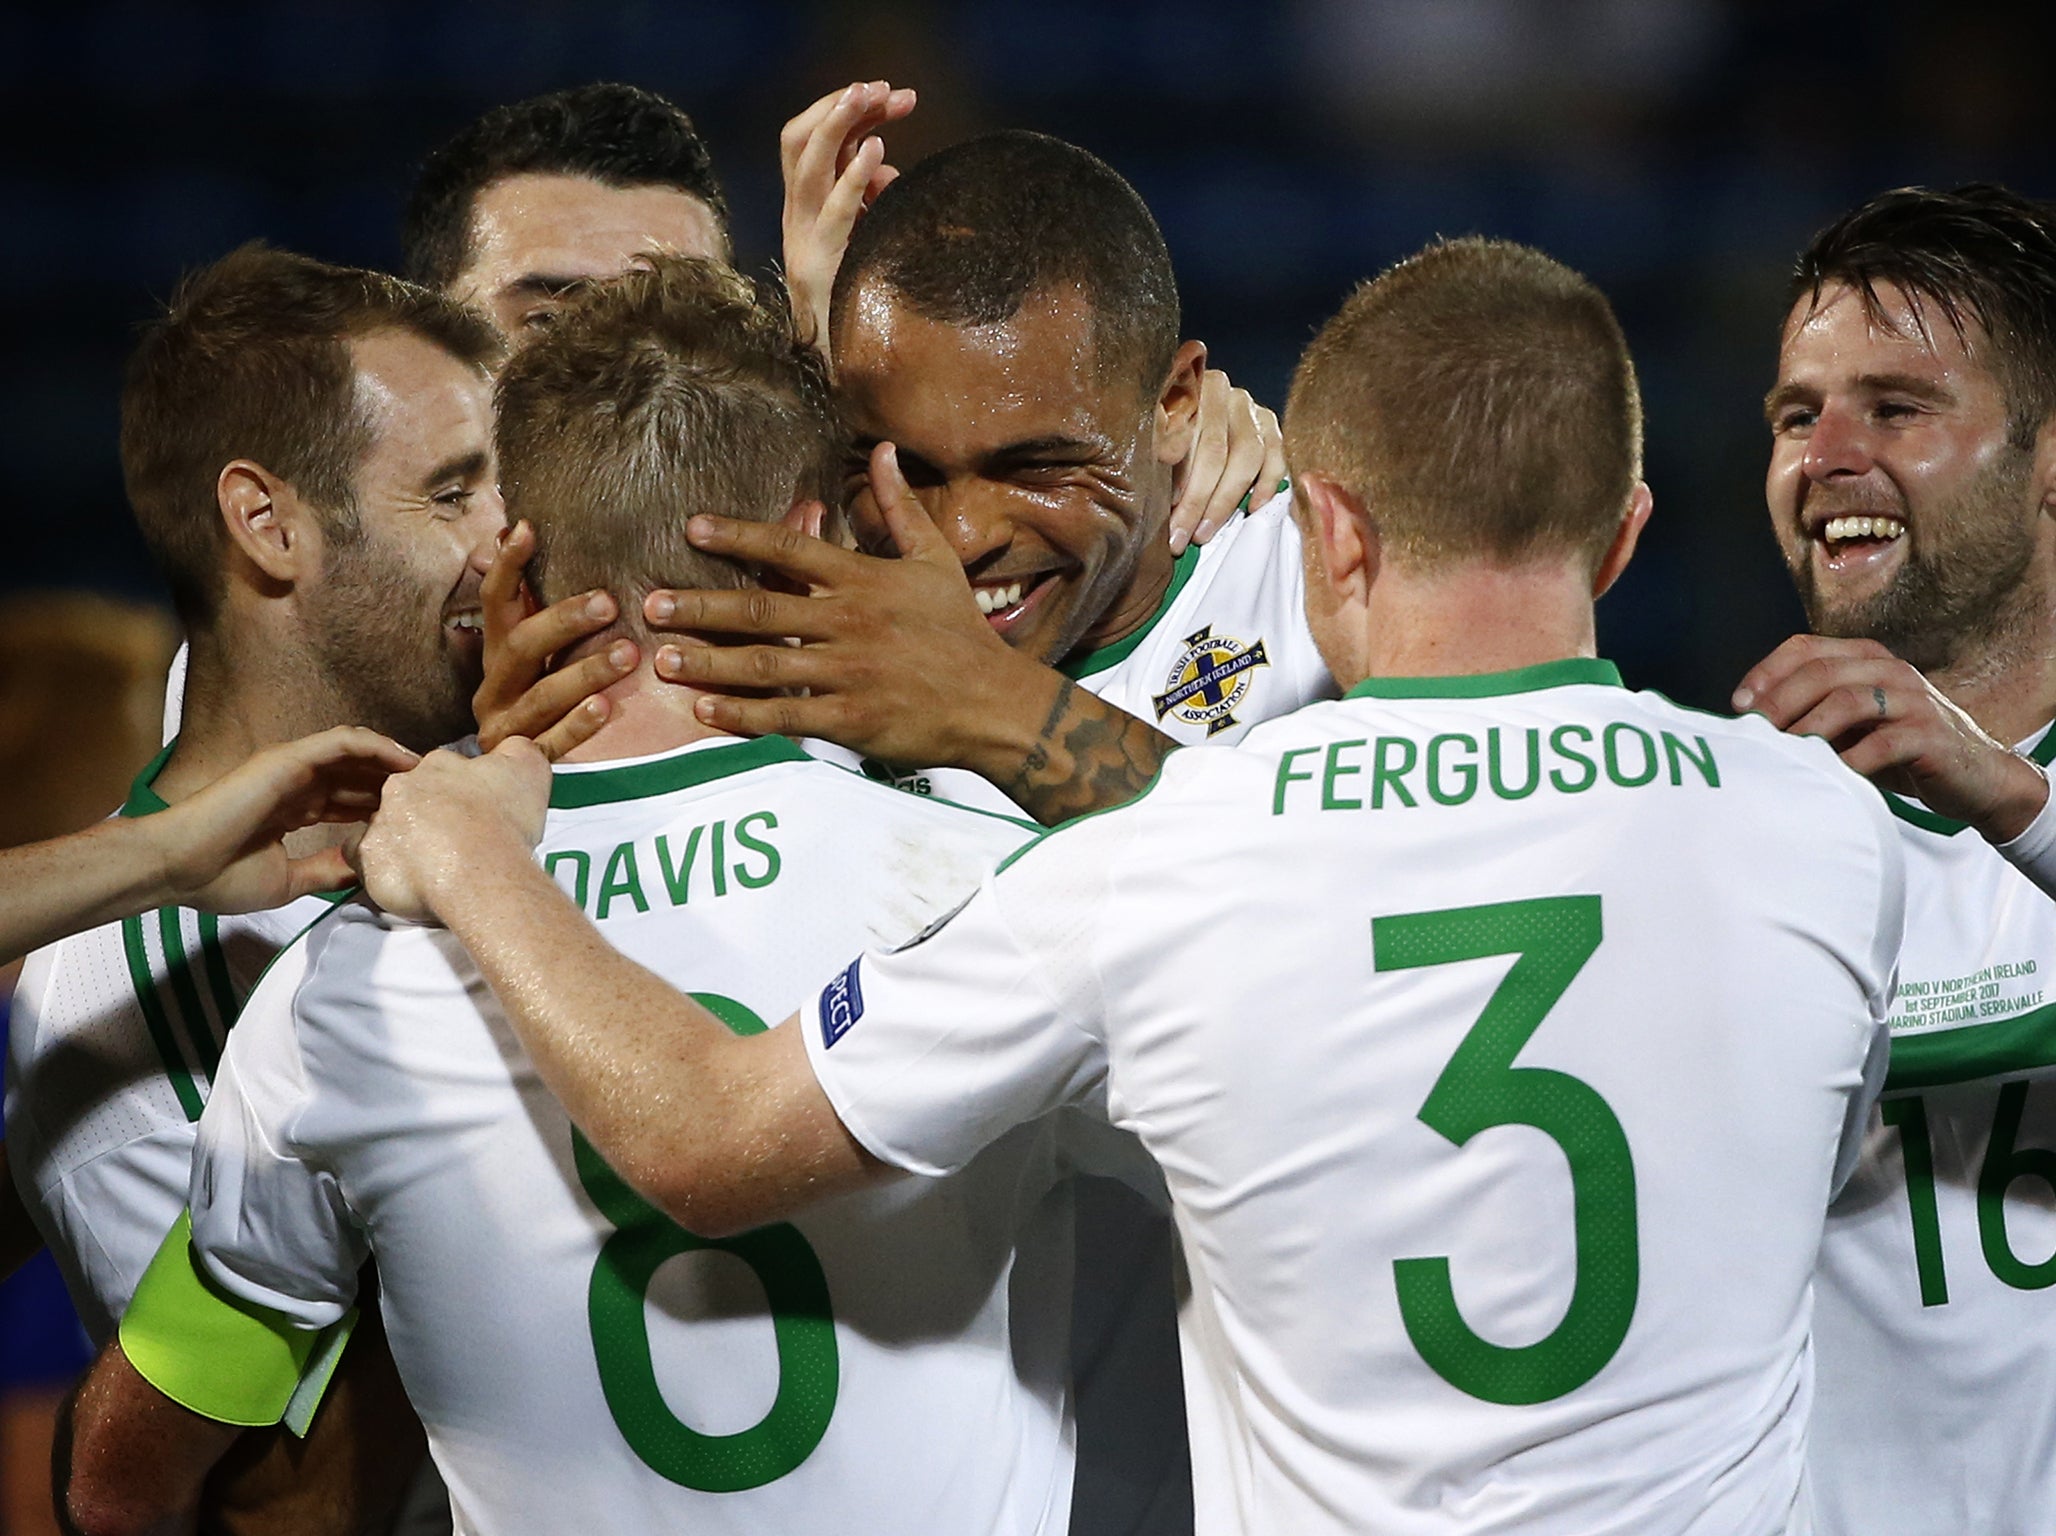 Northern Ireland sit second in Group C